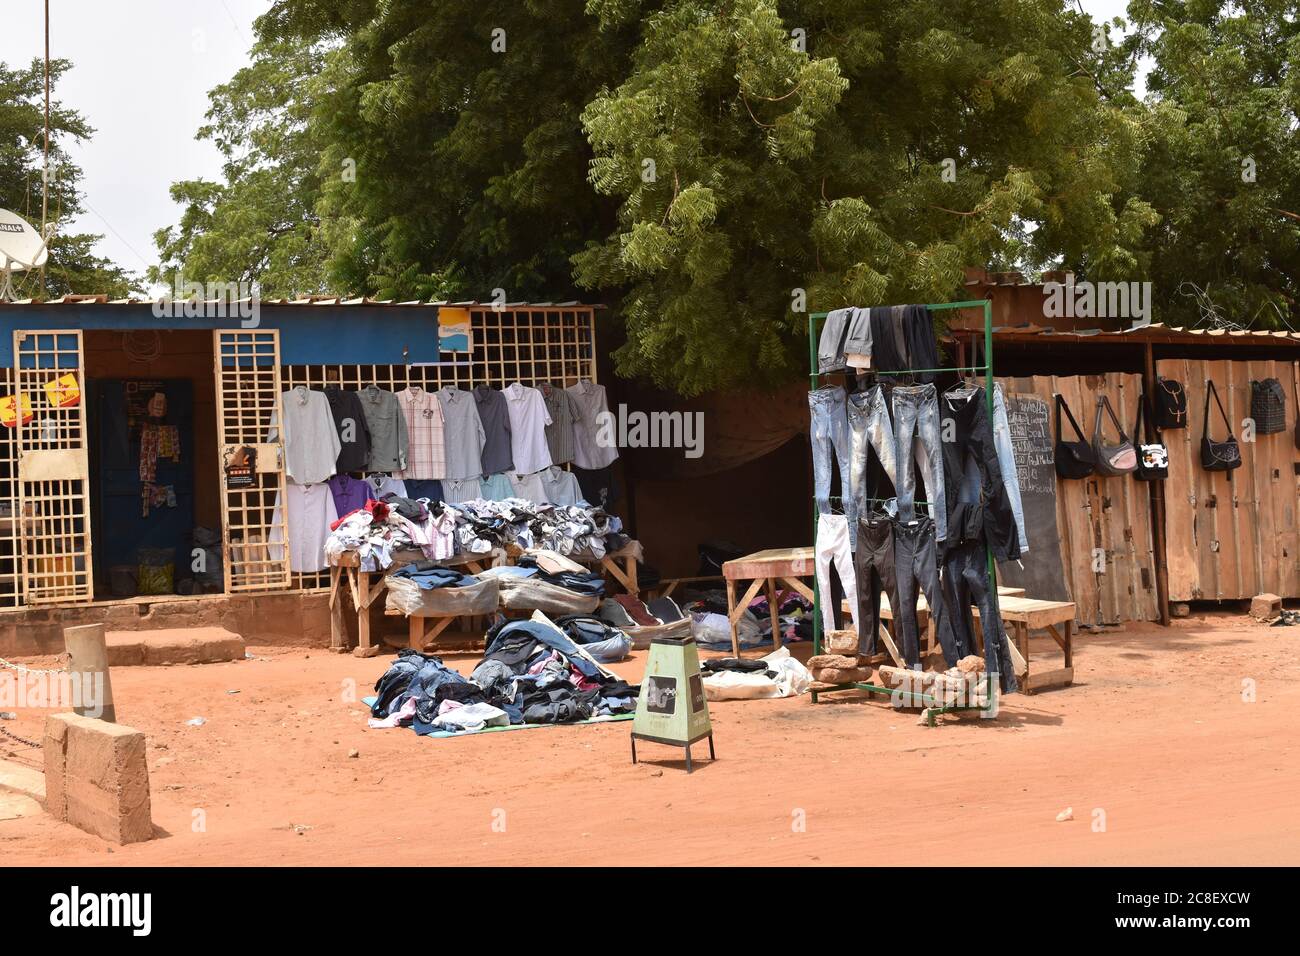 An outdoor display of a used clothing shop in Niamey, Niger, Africa Stock Photo